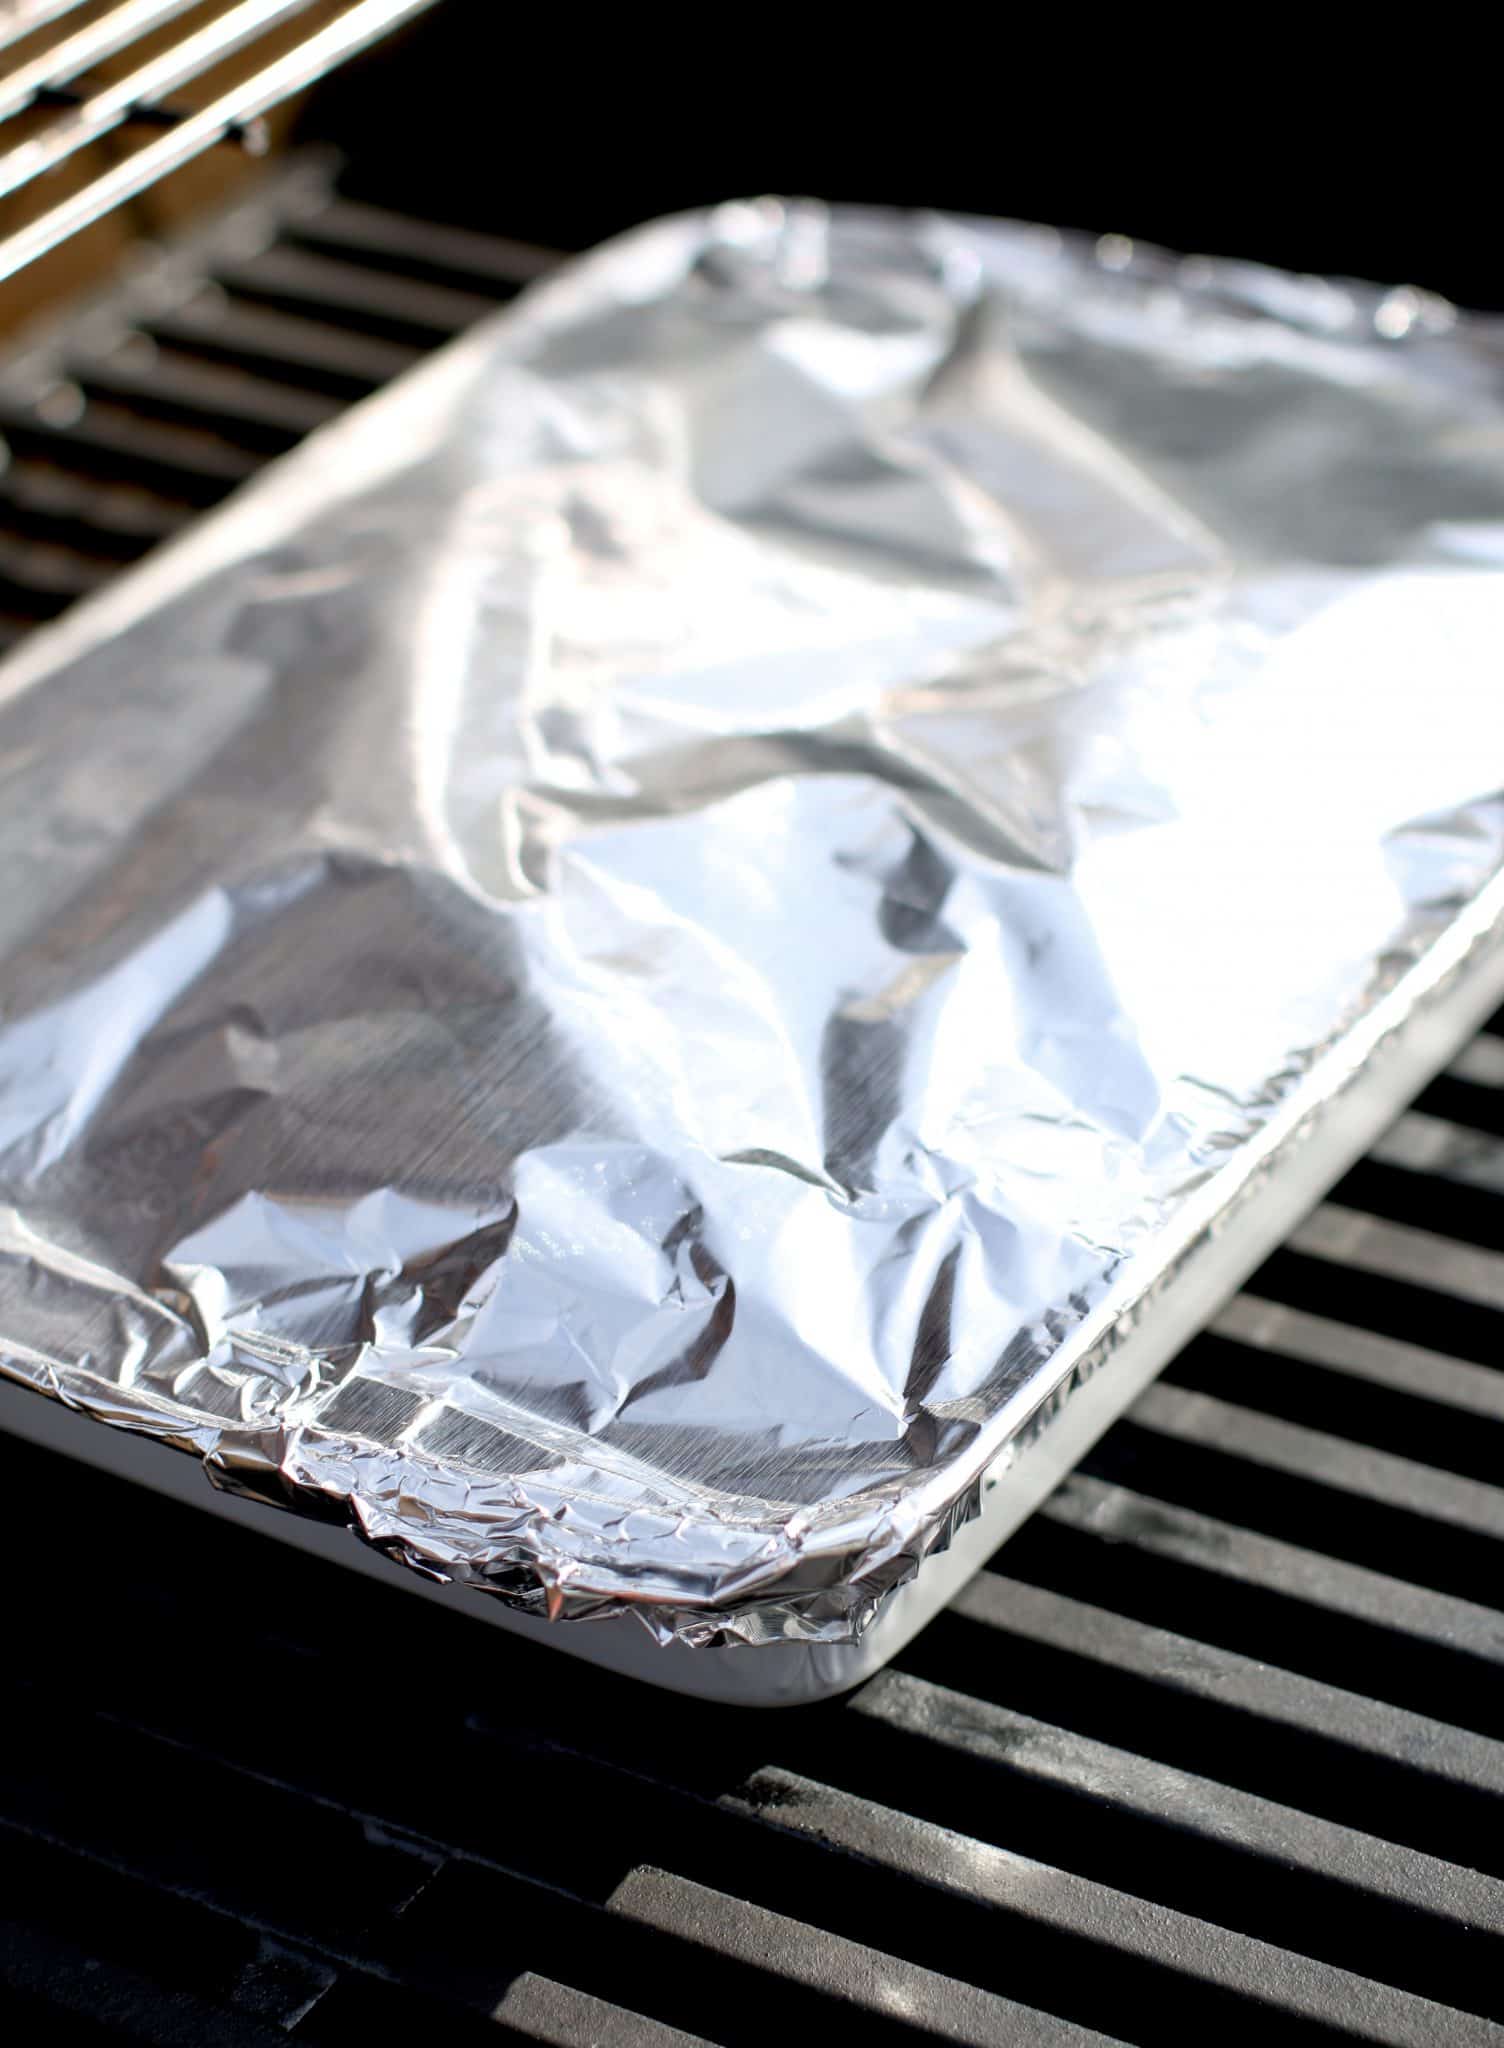 aluminum foil covered baking dish shown on an outdoor grill. 